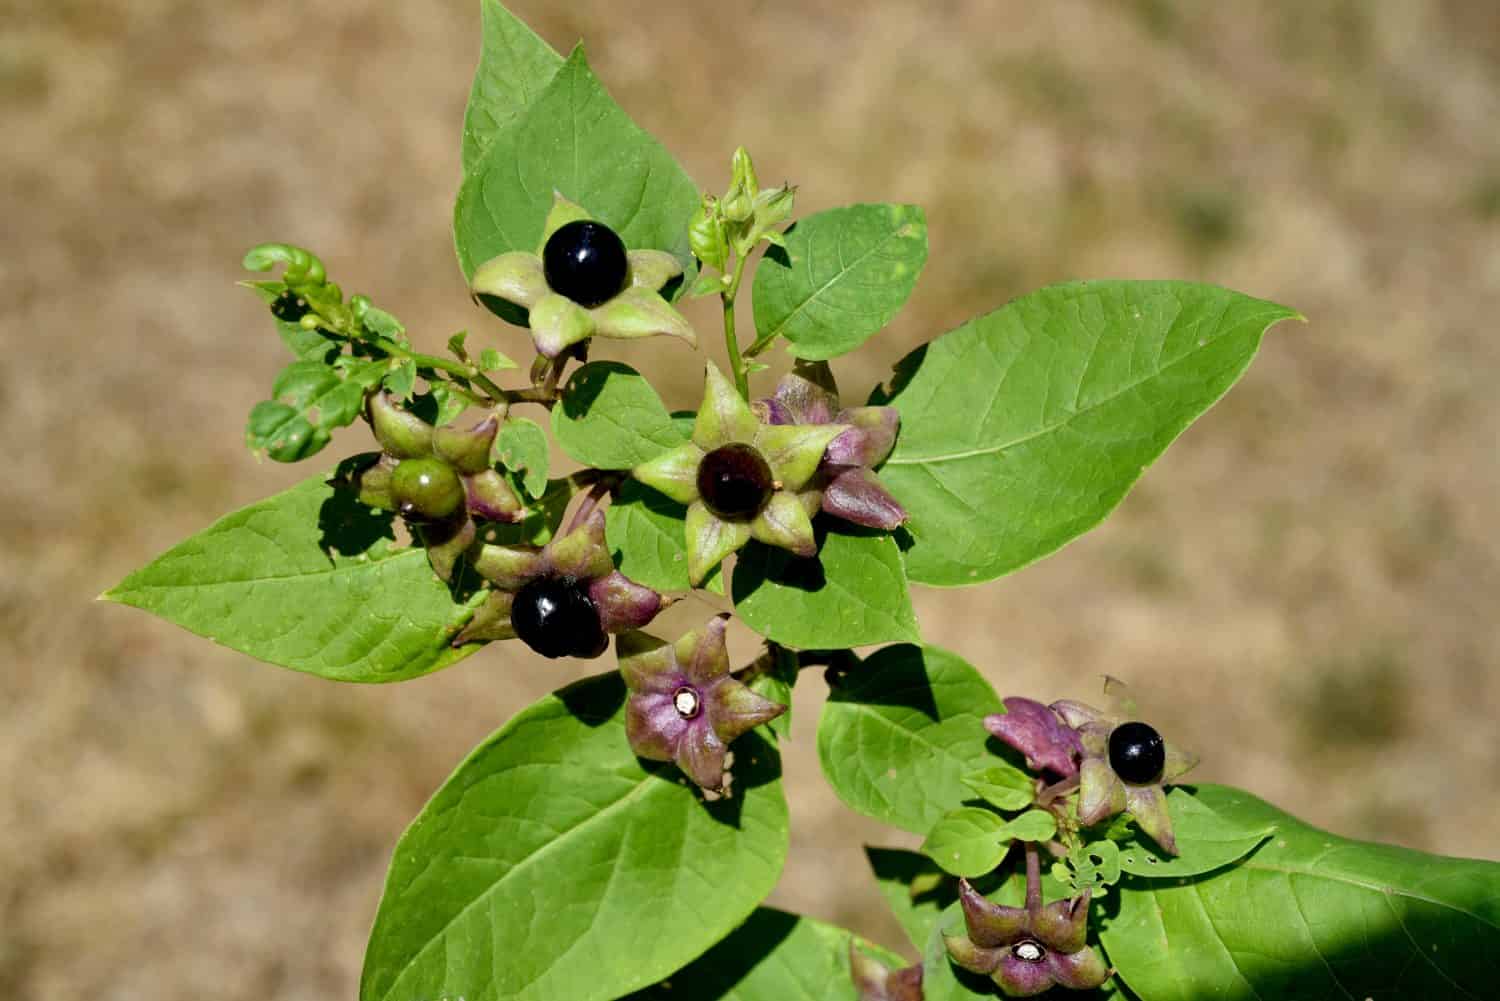 Deadly Nightshade, Atropa bella-donna, has black berries and is a poisonous and medicinal plant.